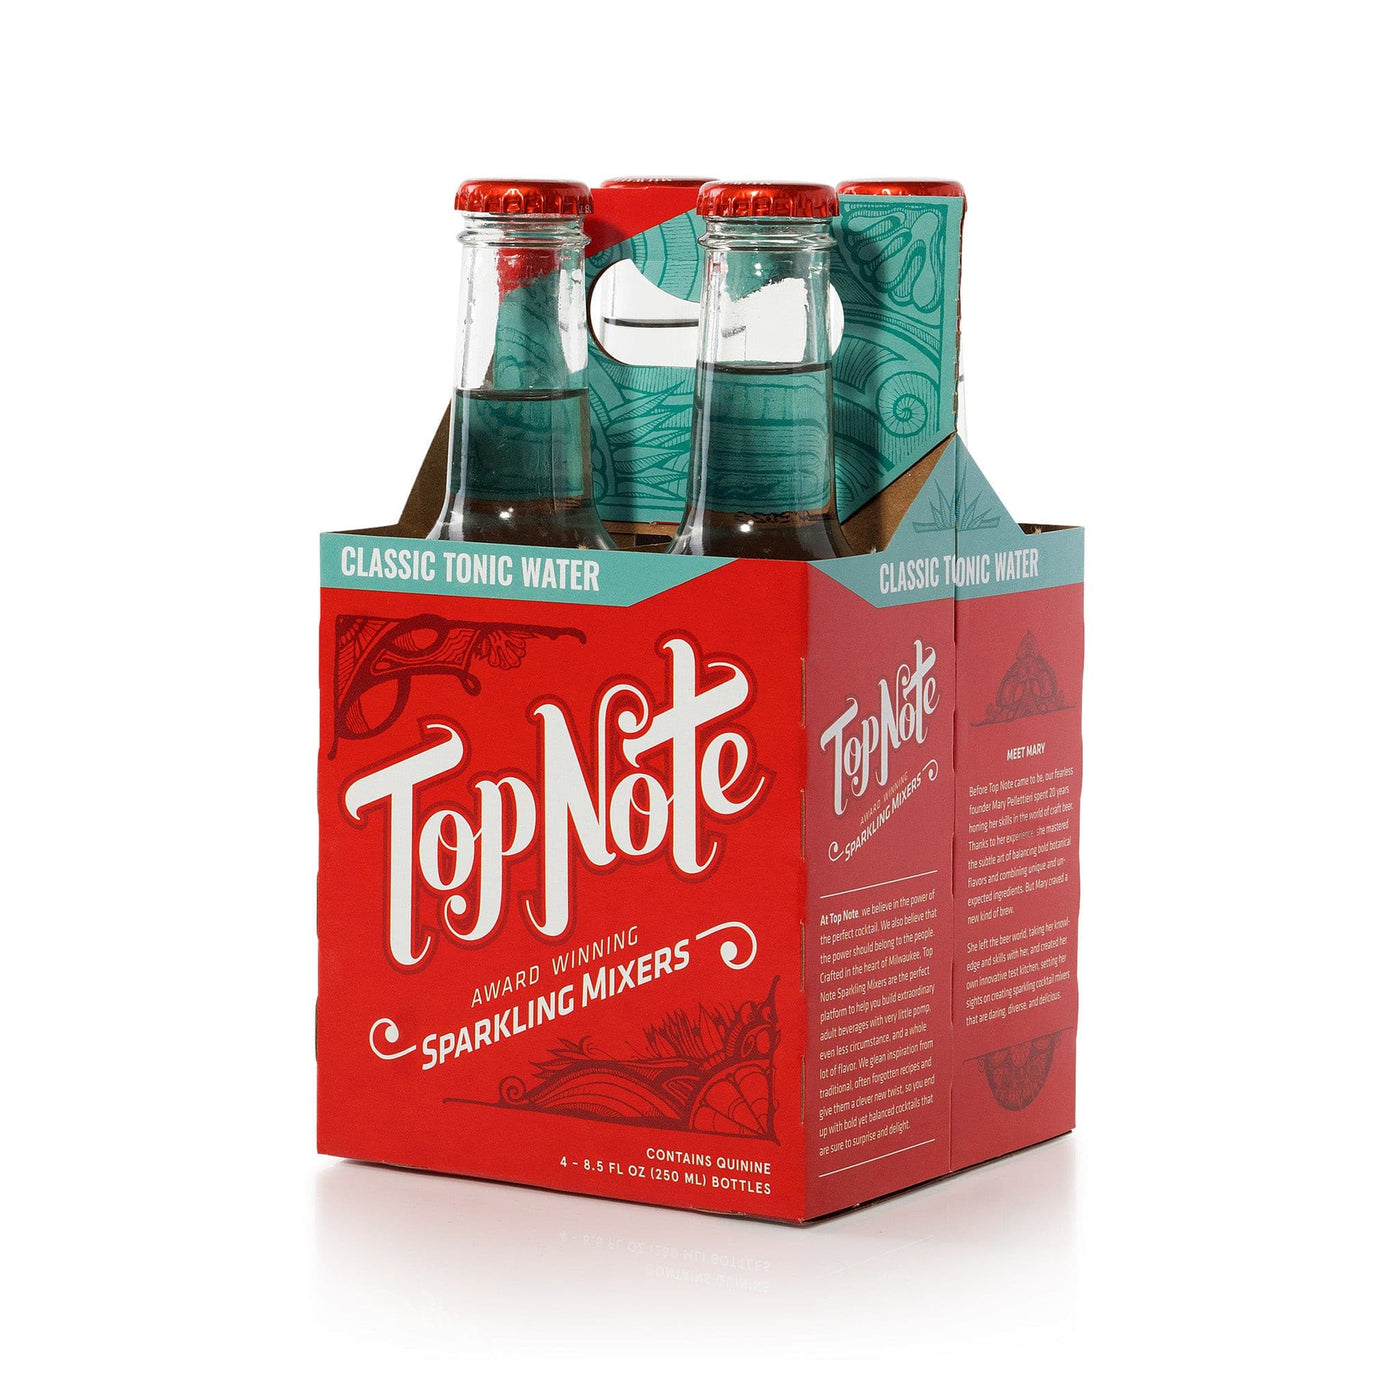 Cocktail Party Pack by Top Note Tonic Store